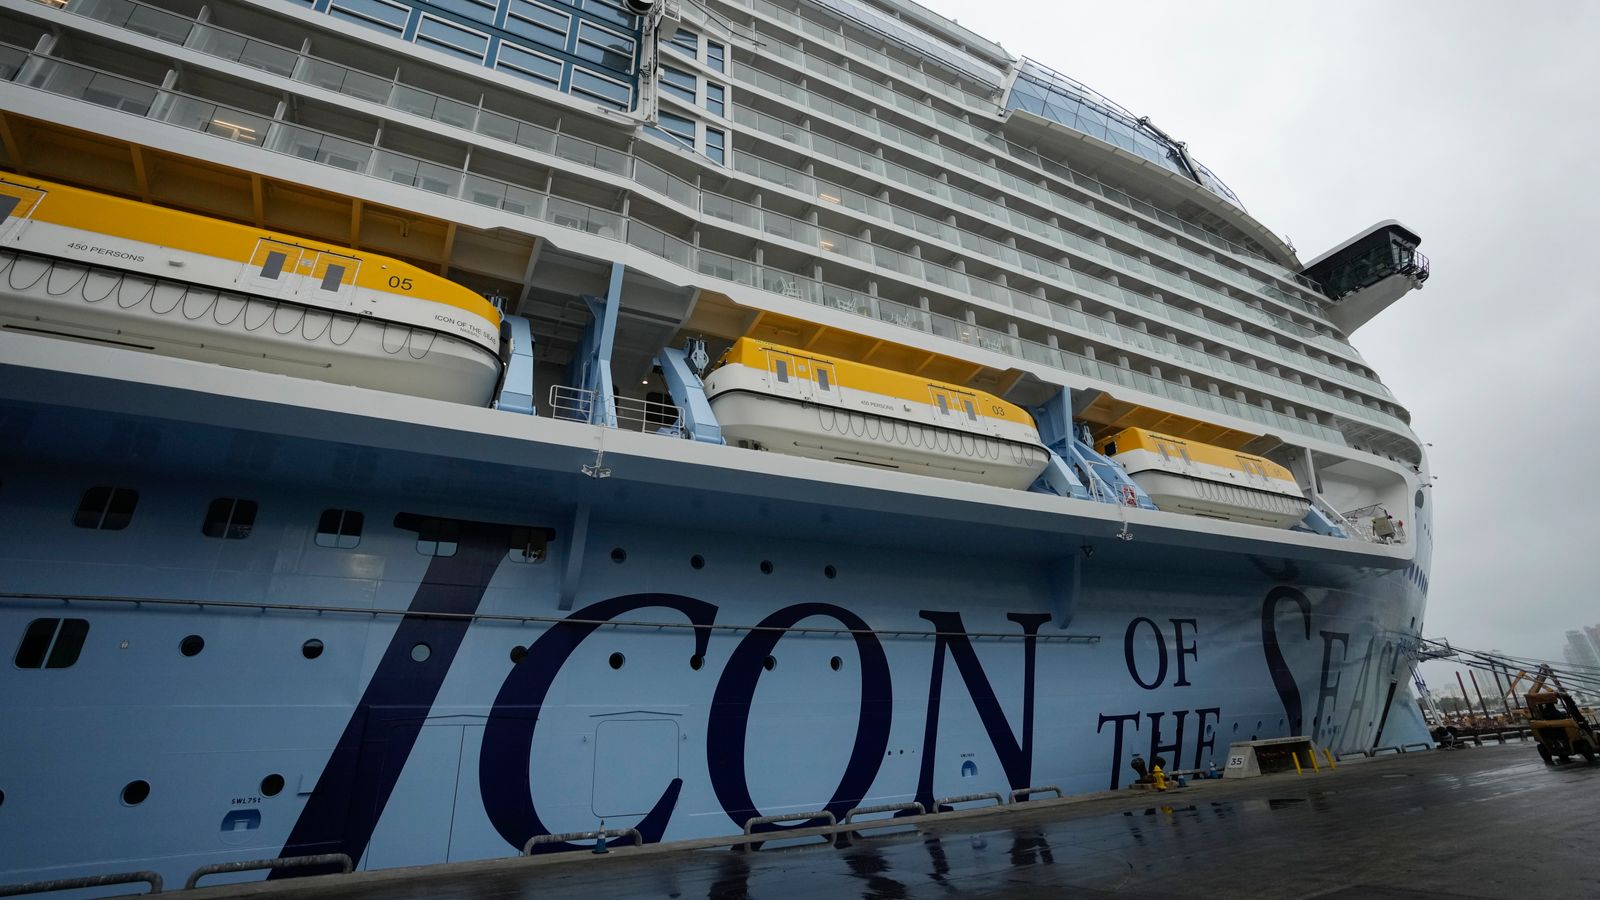 inside the world's largest cruise ship as it sets sail